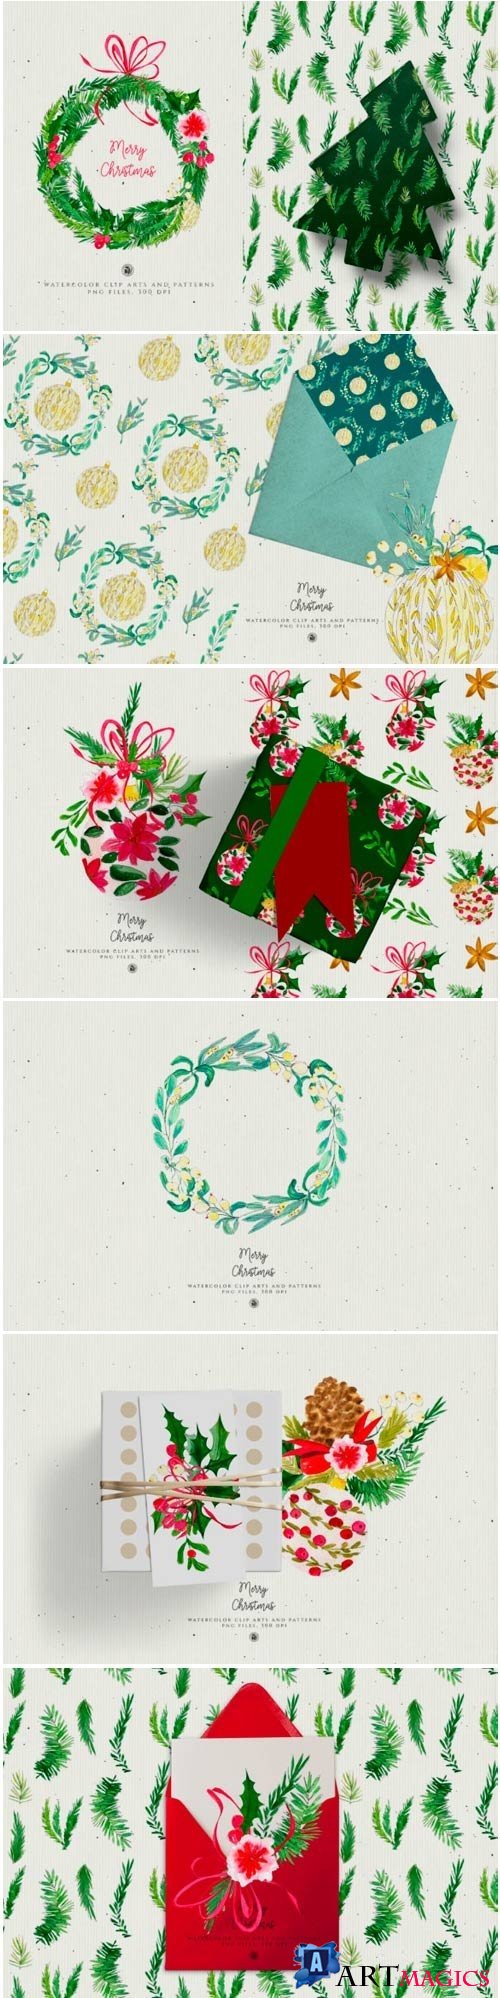 Christmas Watercolor Decorations - 4097212